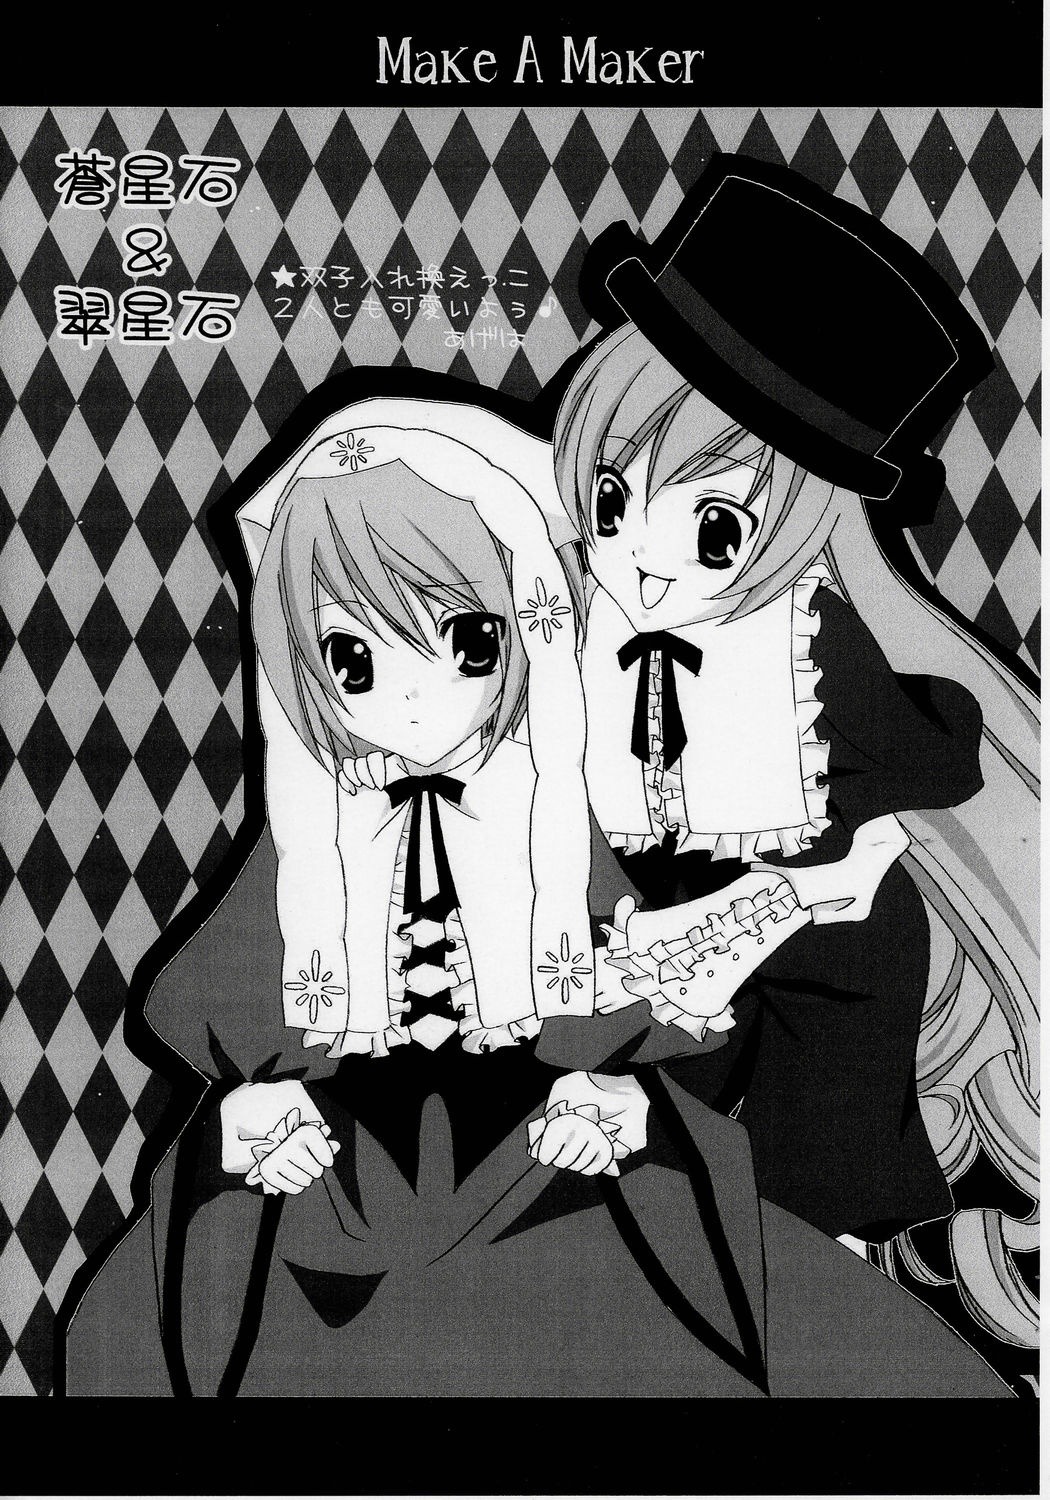 2girls argyle argyle_background argyle_legwear bathtub black_rock_shooter_(character) blanket board_game body_writing card checkerboard_cookie checkered checkered_background checkered_floor checkered_kimono checkered_scarf checkered_shirt checkered_skirt chess_piece cookie diamond_(shape) female_saniwa_(touken_ranbu) flag floor happy_halloween hat himekaidou_hatate holding_flag jester_cap king_(chess) knight_(chess) lying mirror monochrome multiple_girls on_floor open_mouth perspective plaid_background race_queen reflection reflective_floor rook_(chess) shide tile_floor tile_wall tiles top_hat vanishing_point